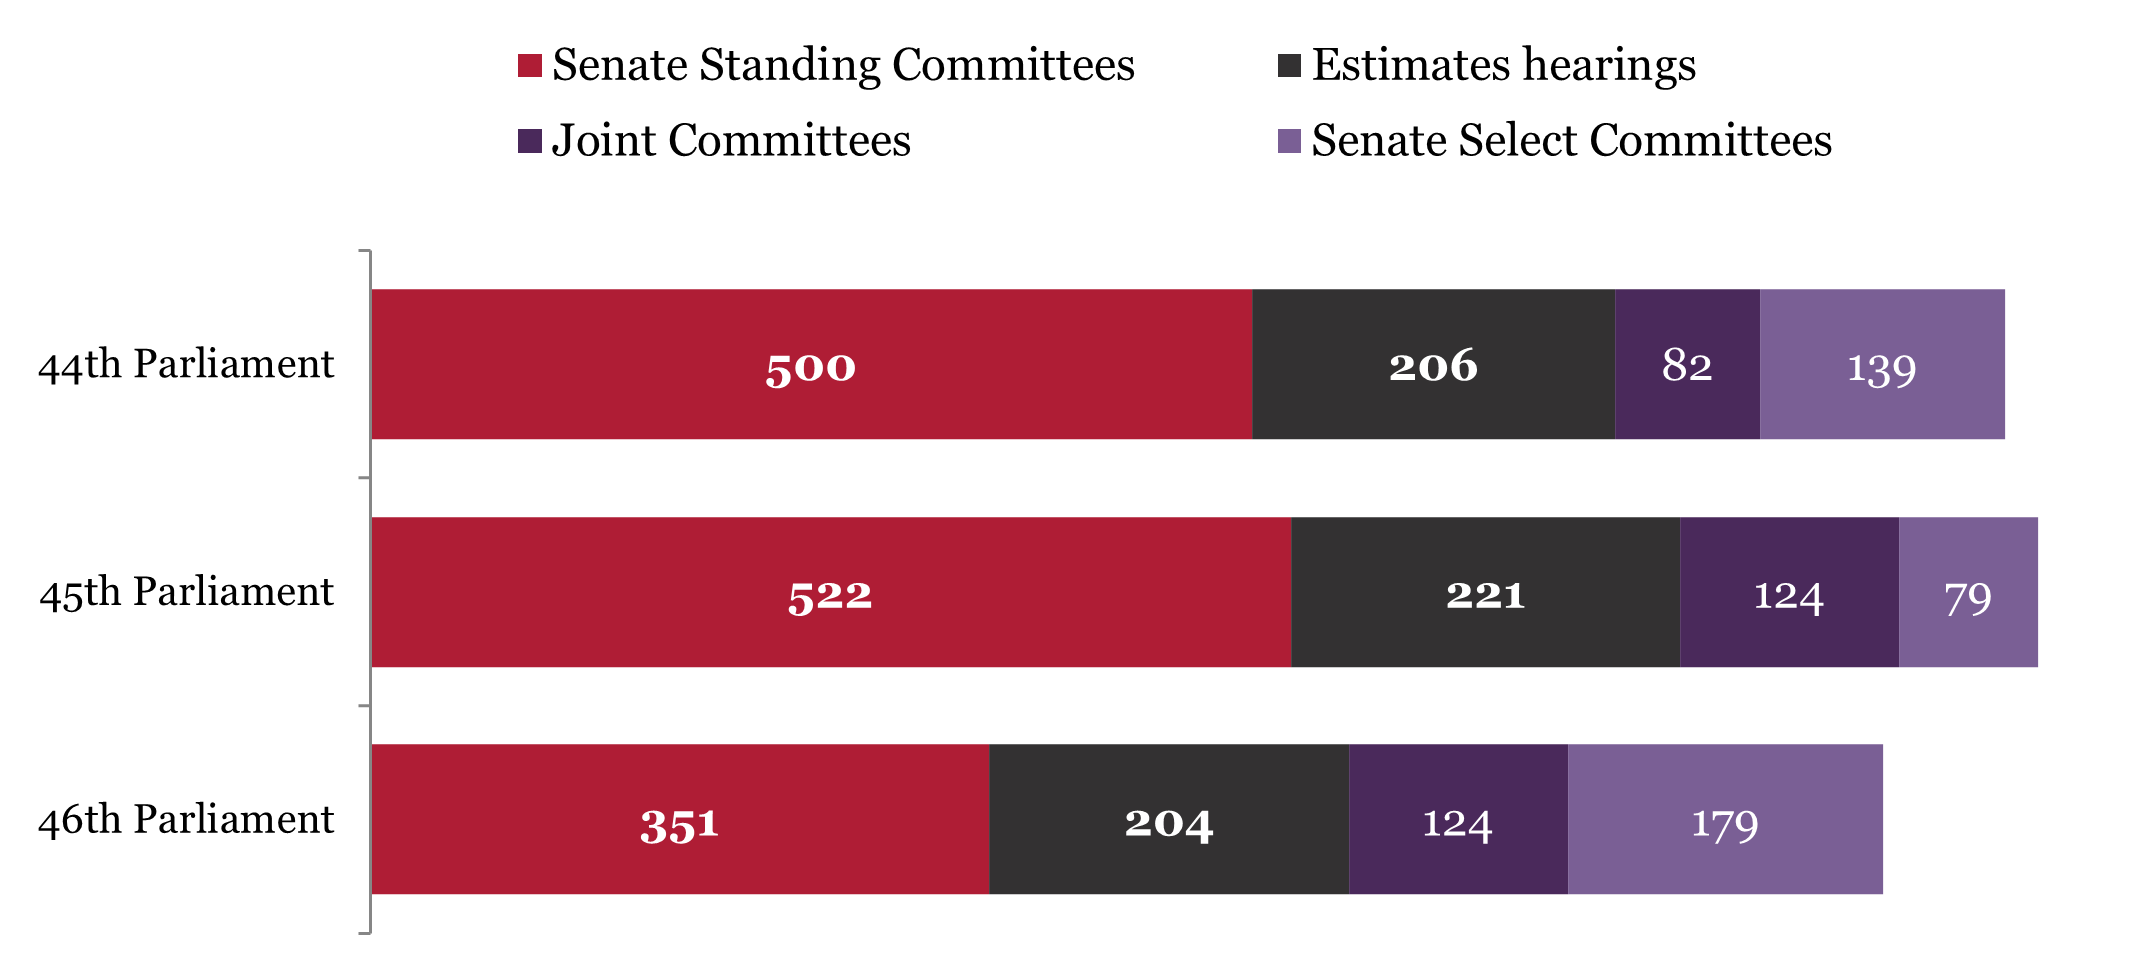 Bar graph of hearings held by Senate Committees at the end of previous 3 Parliaments. 44th parliament: 500 Standing Committee hearings, 206 Estimates hearings, 82 Joint Committee hearings and 139 Select Committee hearings. 45th Parliament: 522 Standing Committee hearings, 221 Estimates hearings, 124 Joint Committee hearings and 79 Select Committee hearings. 46th Parliament: 351 Standing Committee hearings, 204 Estimates hearings, 124 Joint Committee hearings and 179 Select Committee hearings.